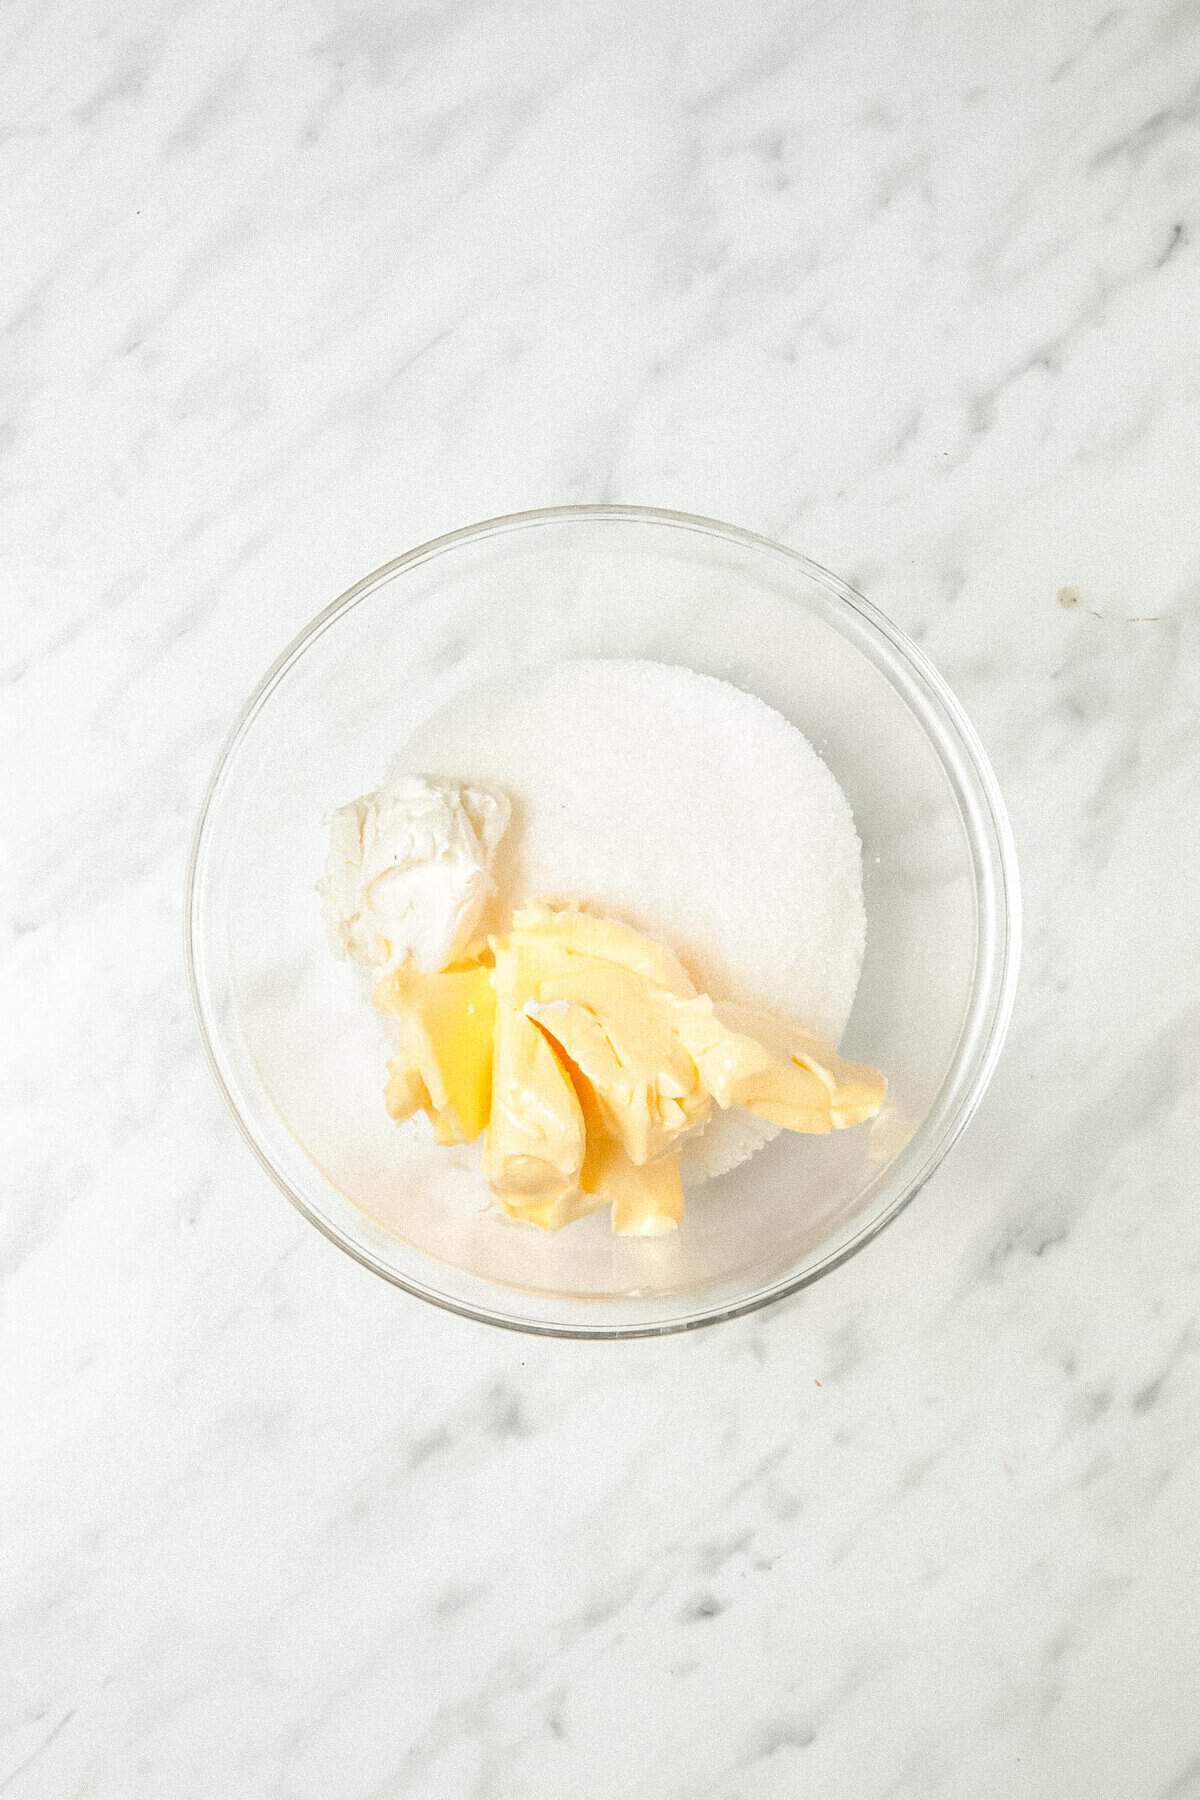 butter, sugar, and cream cheese in a glass bowl